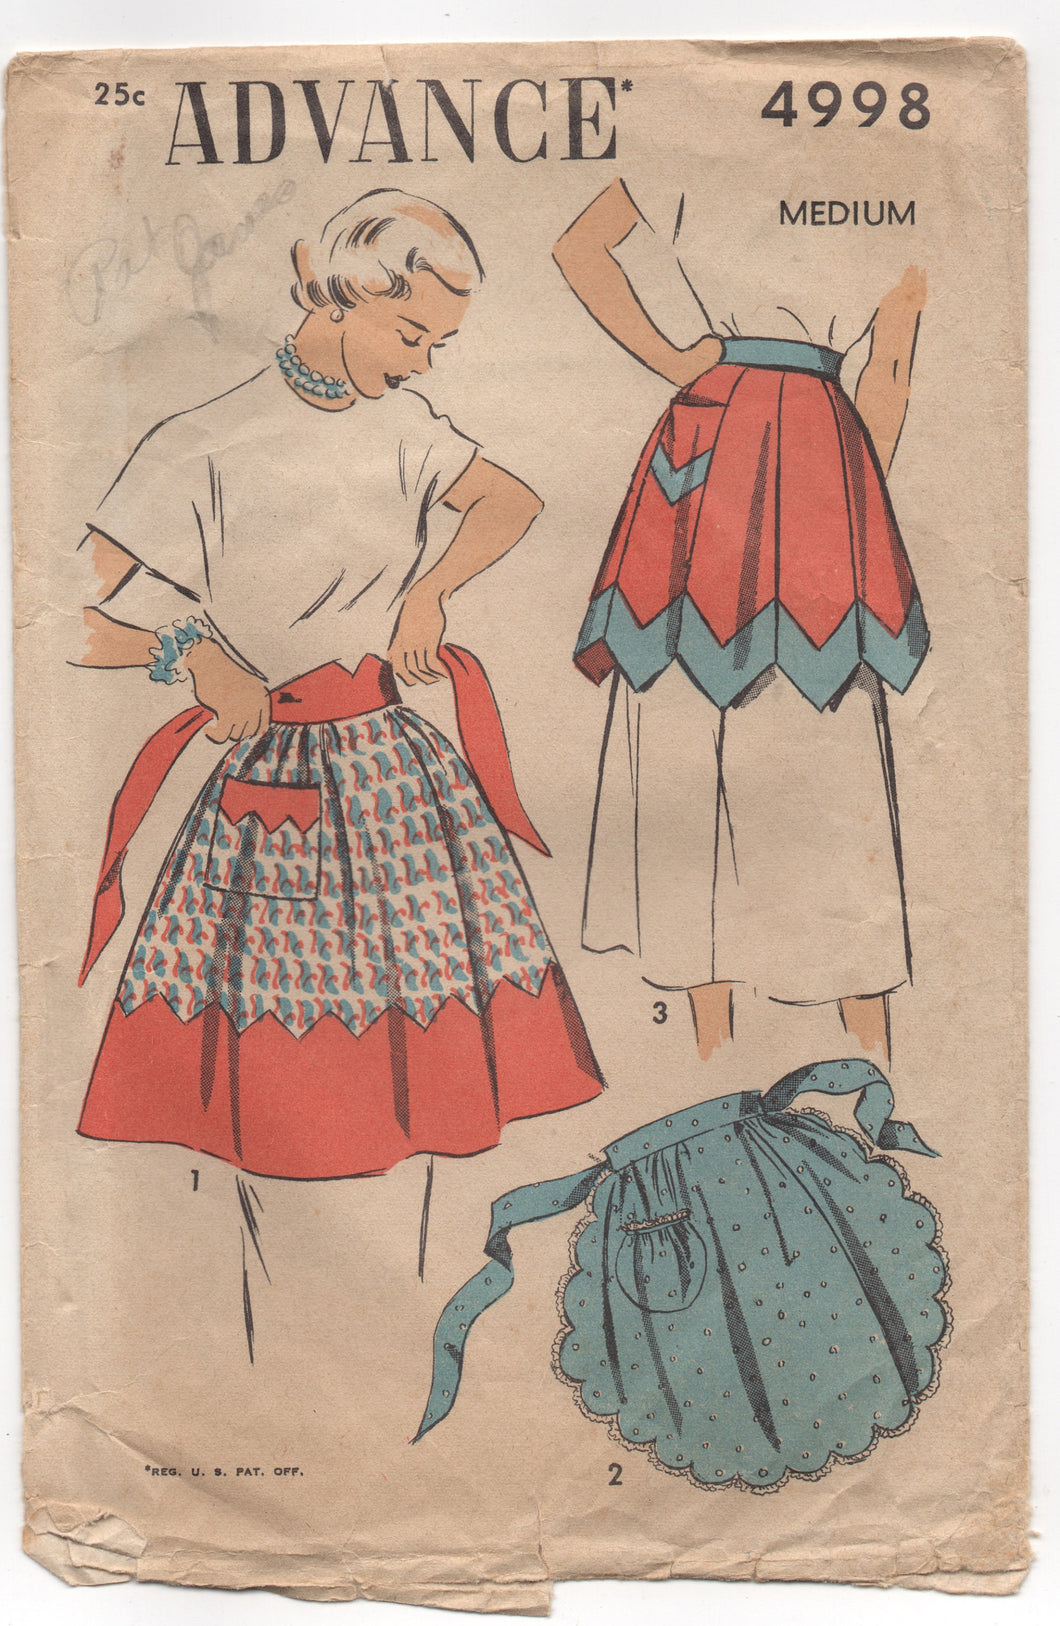 1940's Advance Scalloped Apron, Gored Apron or Apron with Contrasting Band Pattern - Waist 28-30